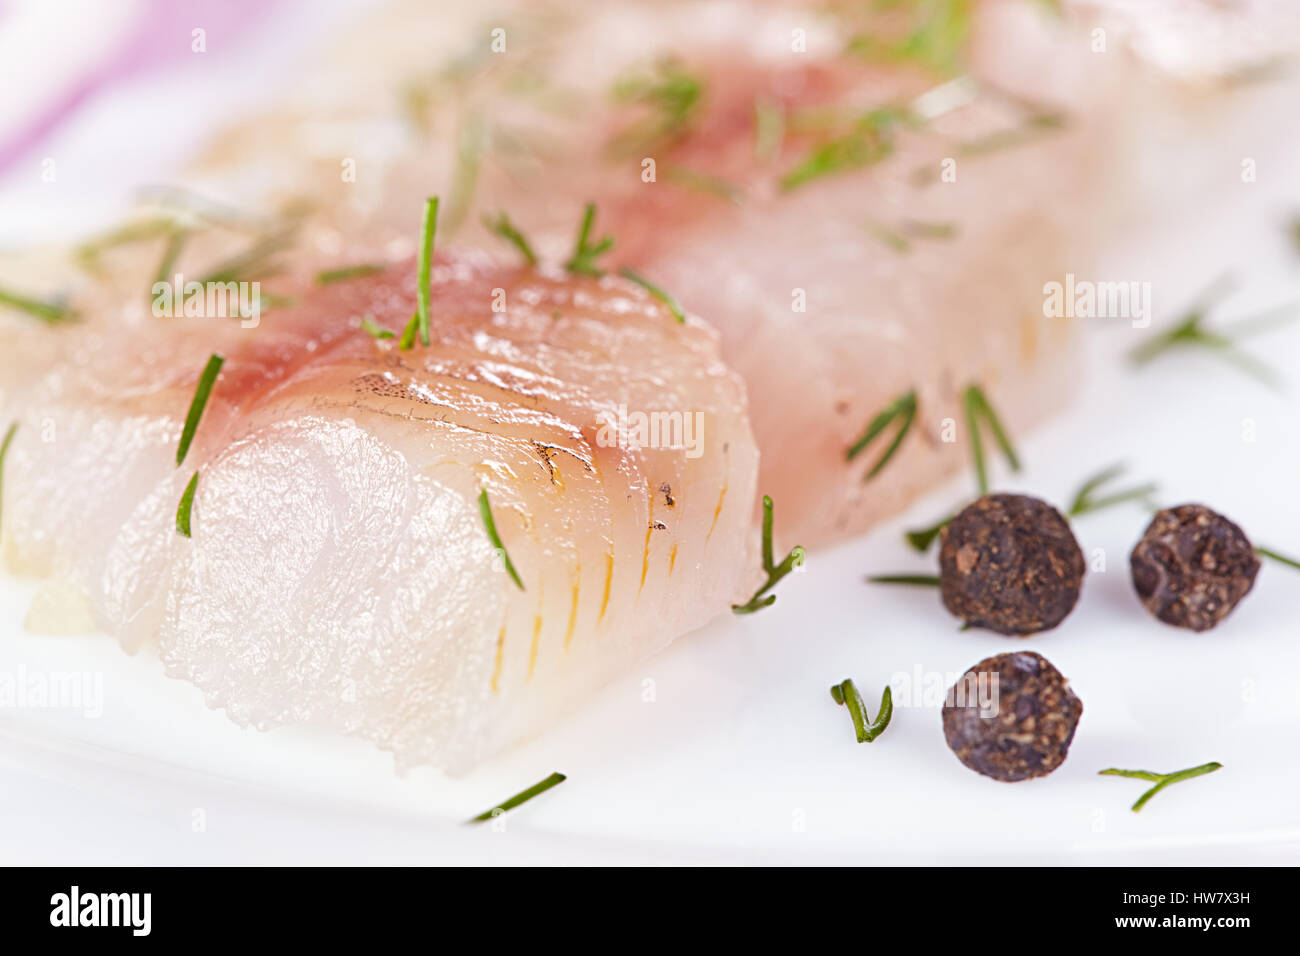 Fillet of a lightly salted grayling closeup Stock Photo